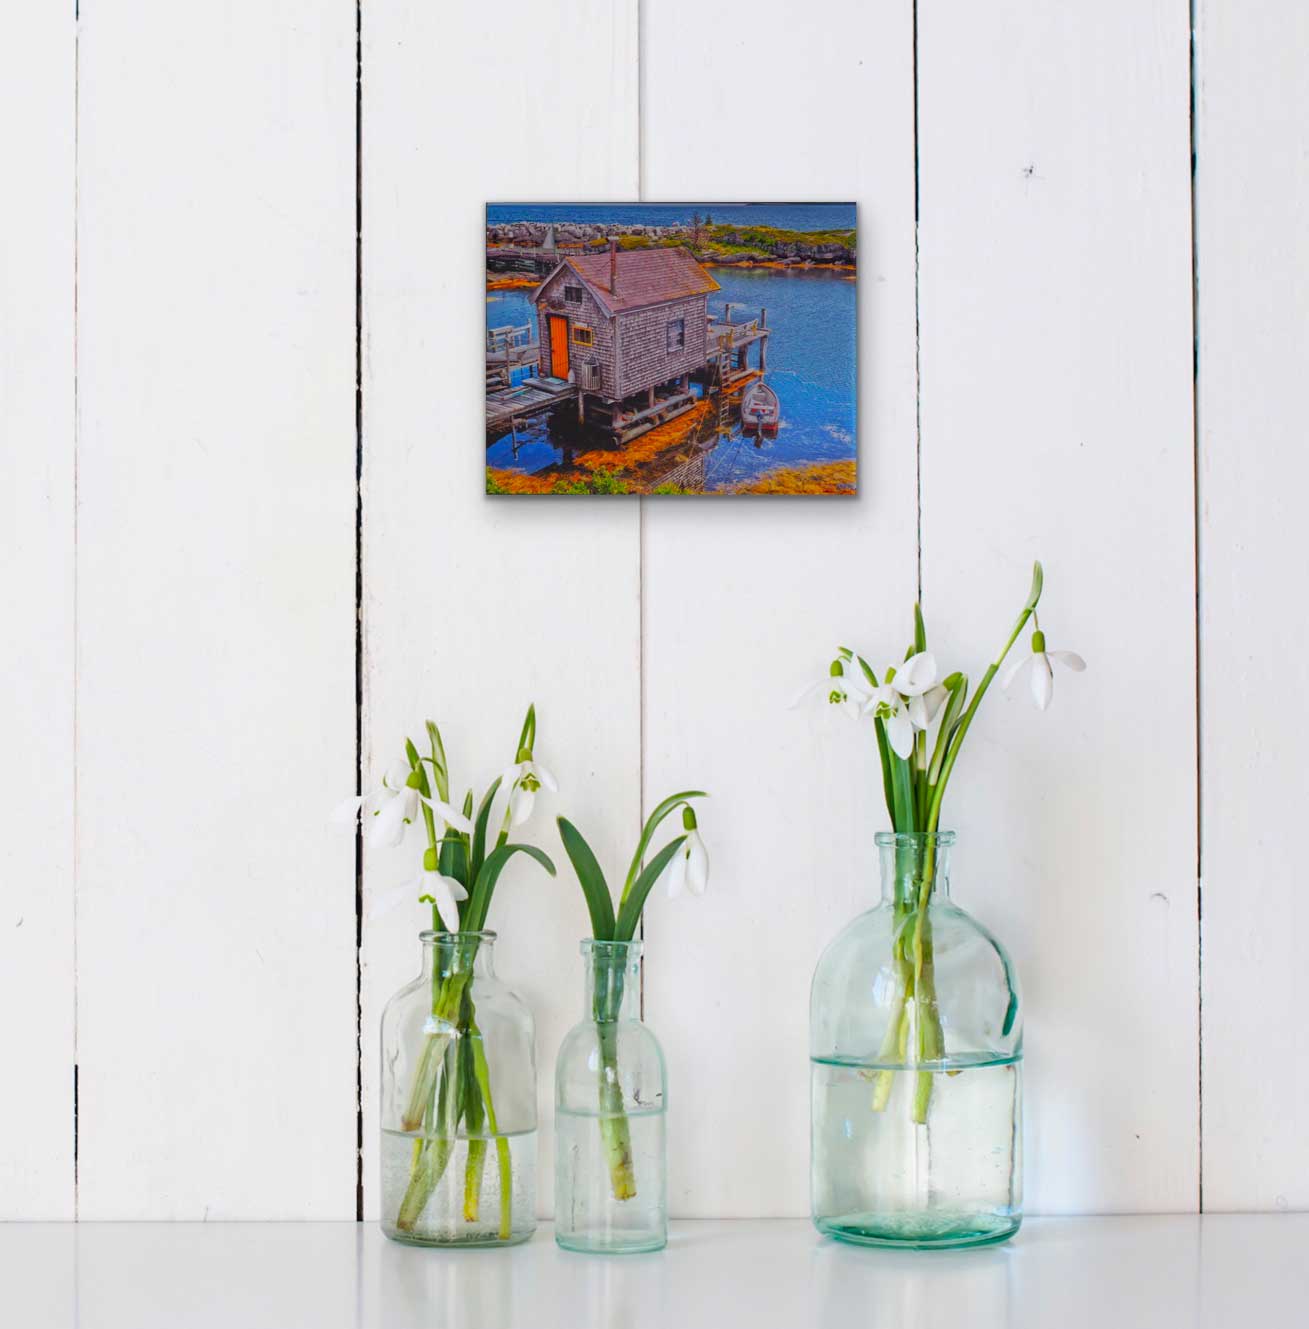 Spectacular view of Blue Rocks harbour featuring a picturesque fisherman's boathouse.   Photography 8 x 10 inches covered with resin. Ready-to-hang in your favorite room.